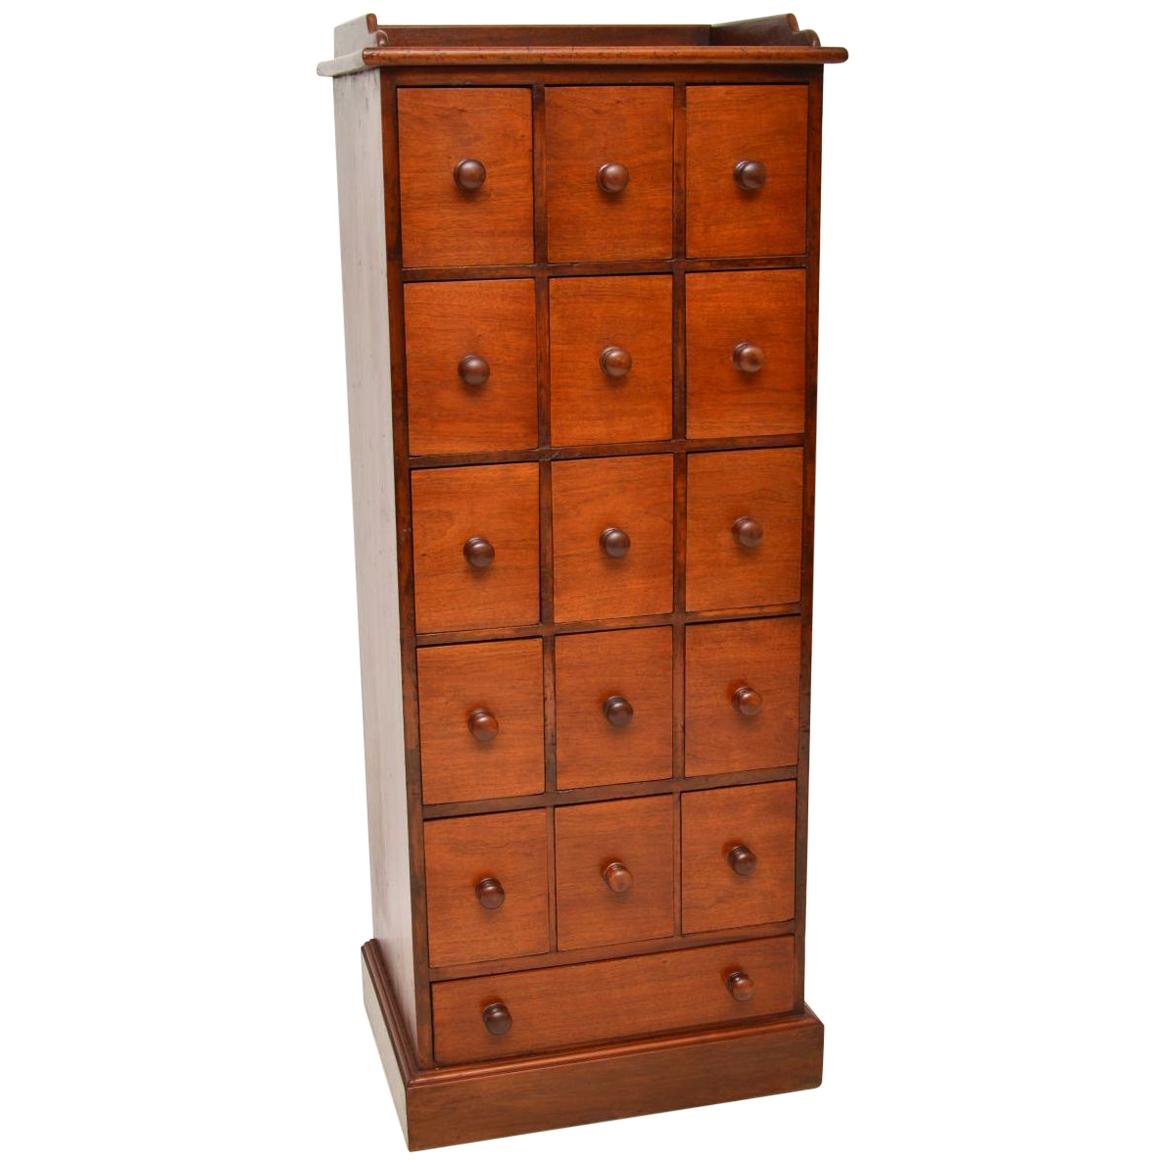 Large Antique Victorian Mahogany Apothecary Chest of Drawers